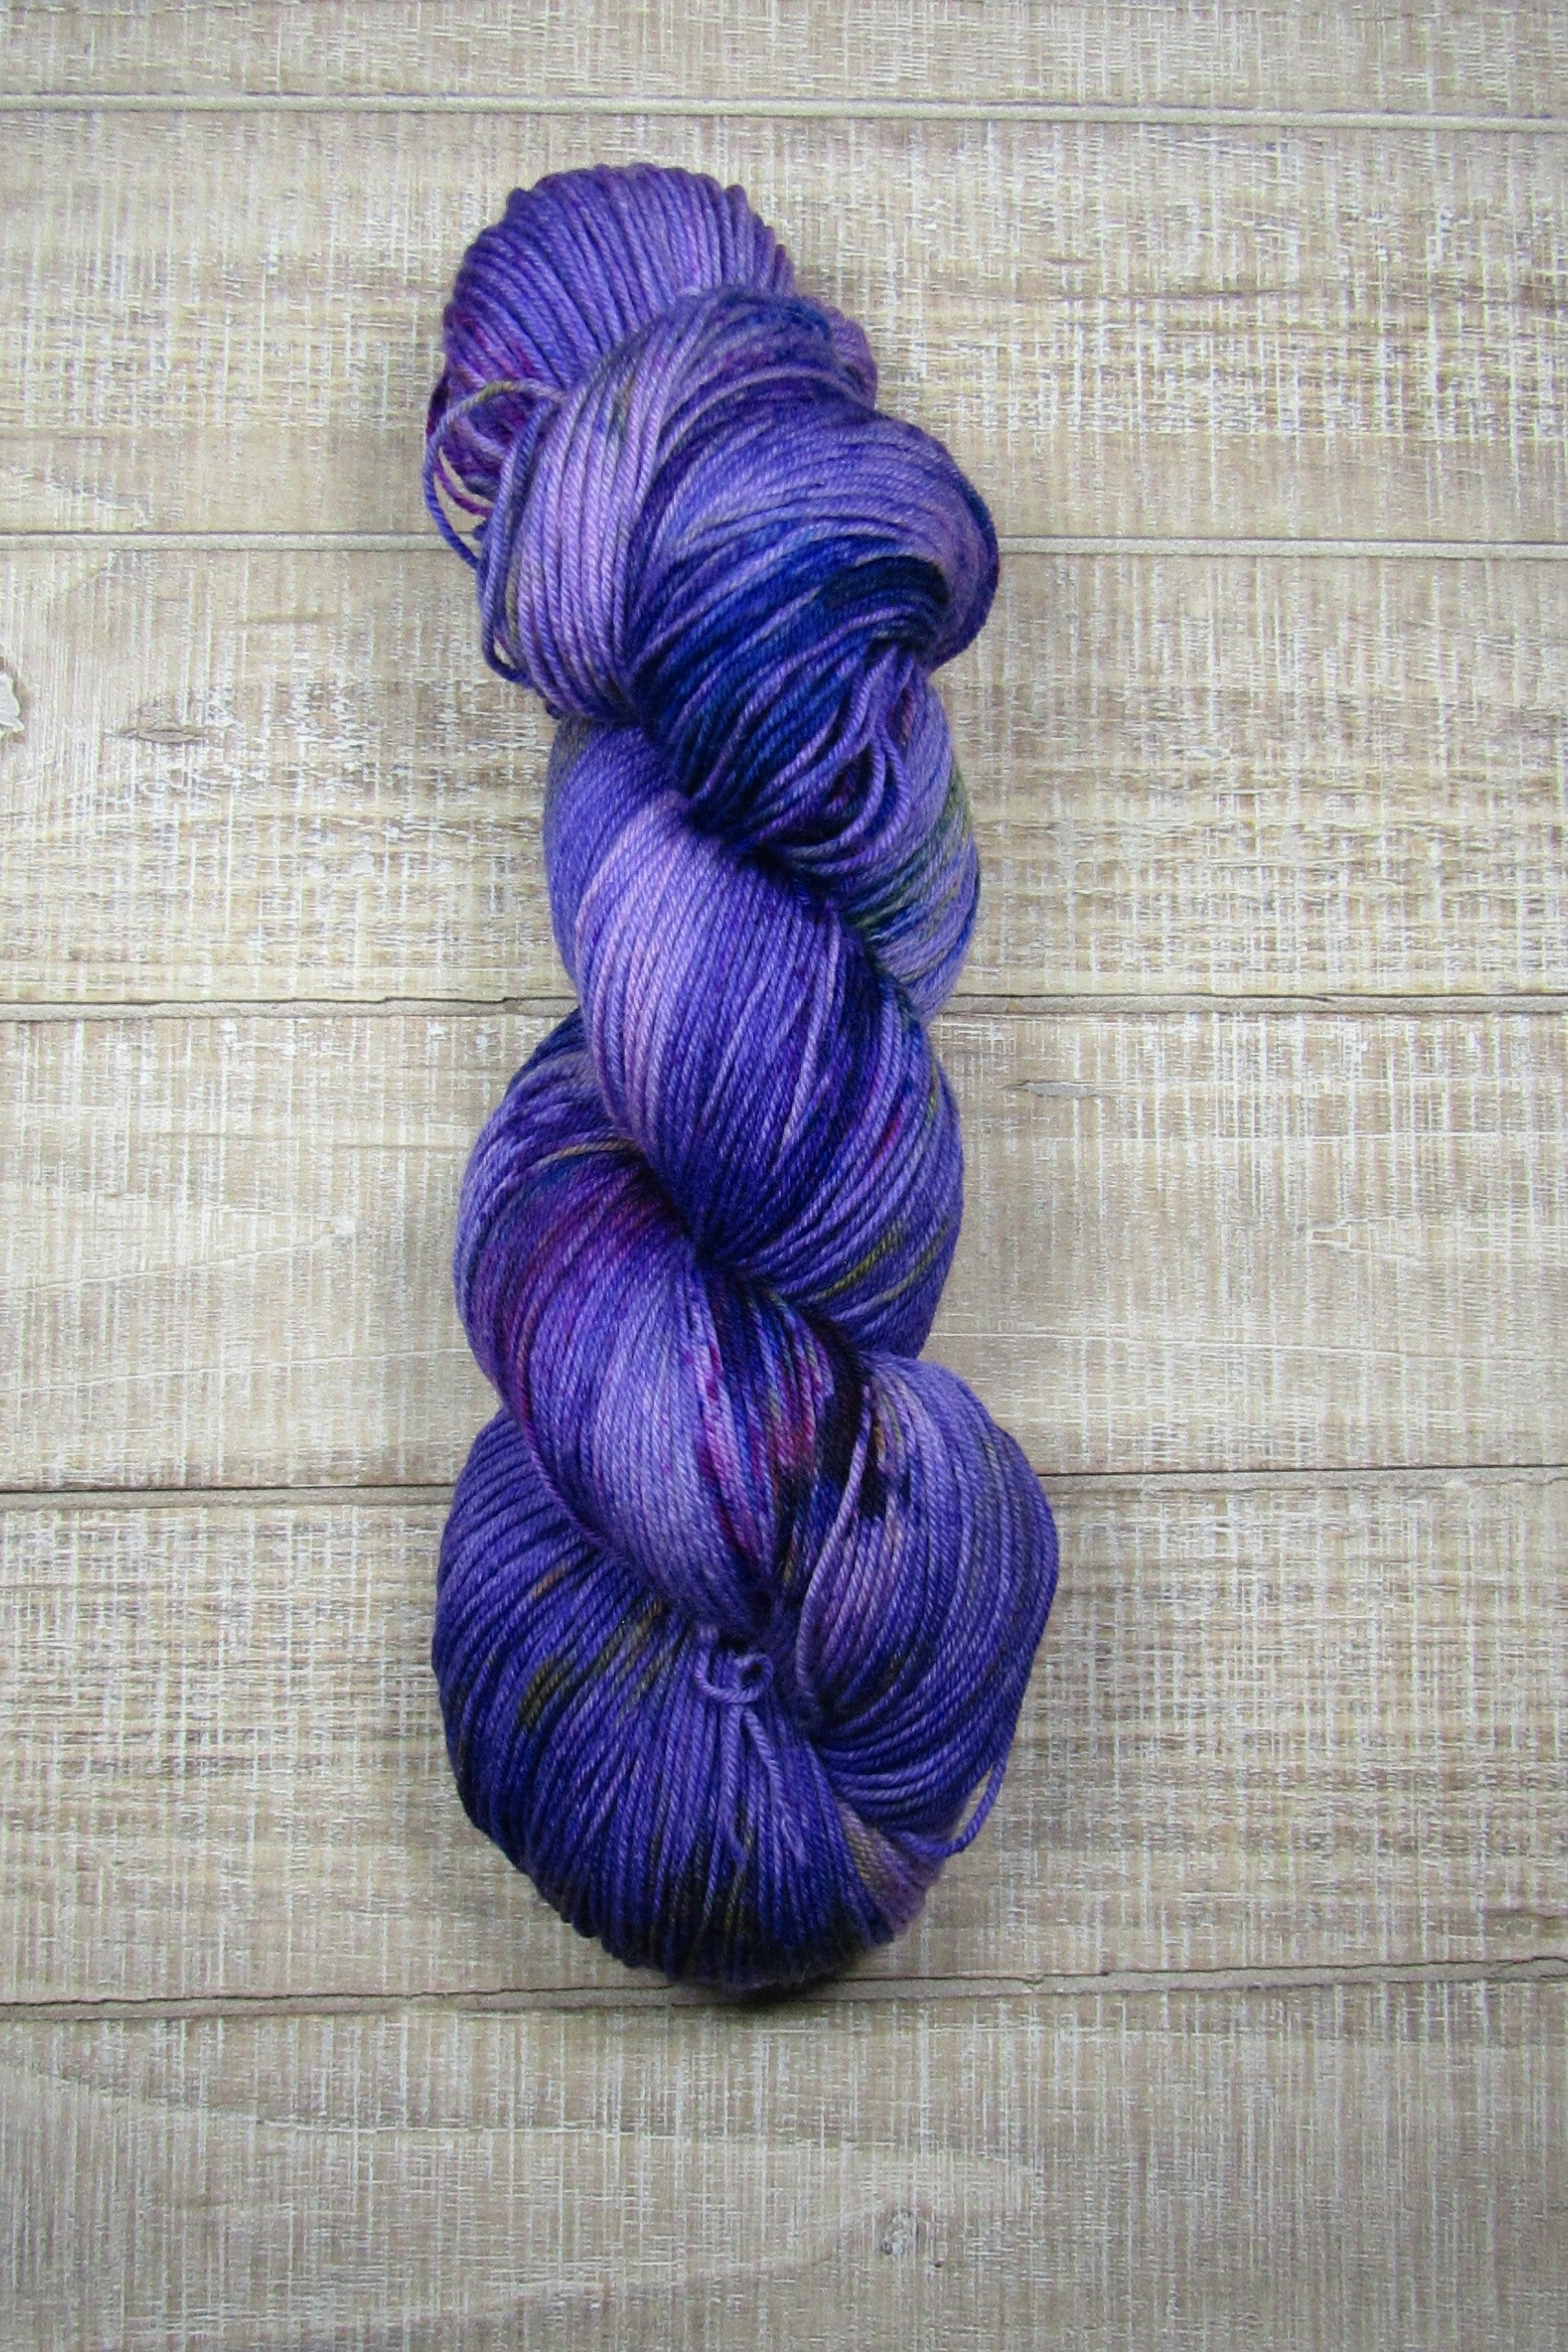 Hand-Dyed Yarn Galileo in a color of purple with areas of blue, yellow, brown, purple, and fuschia.